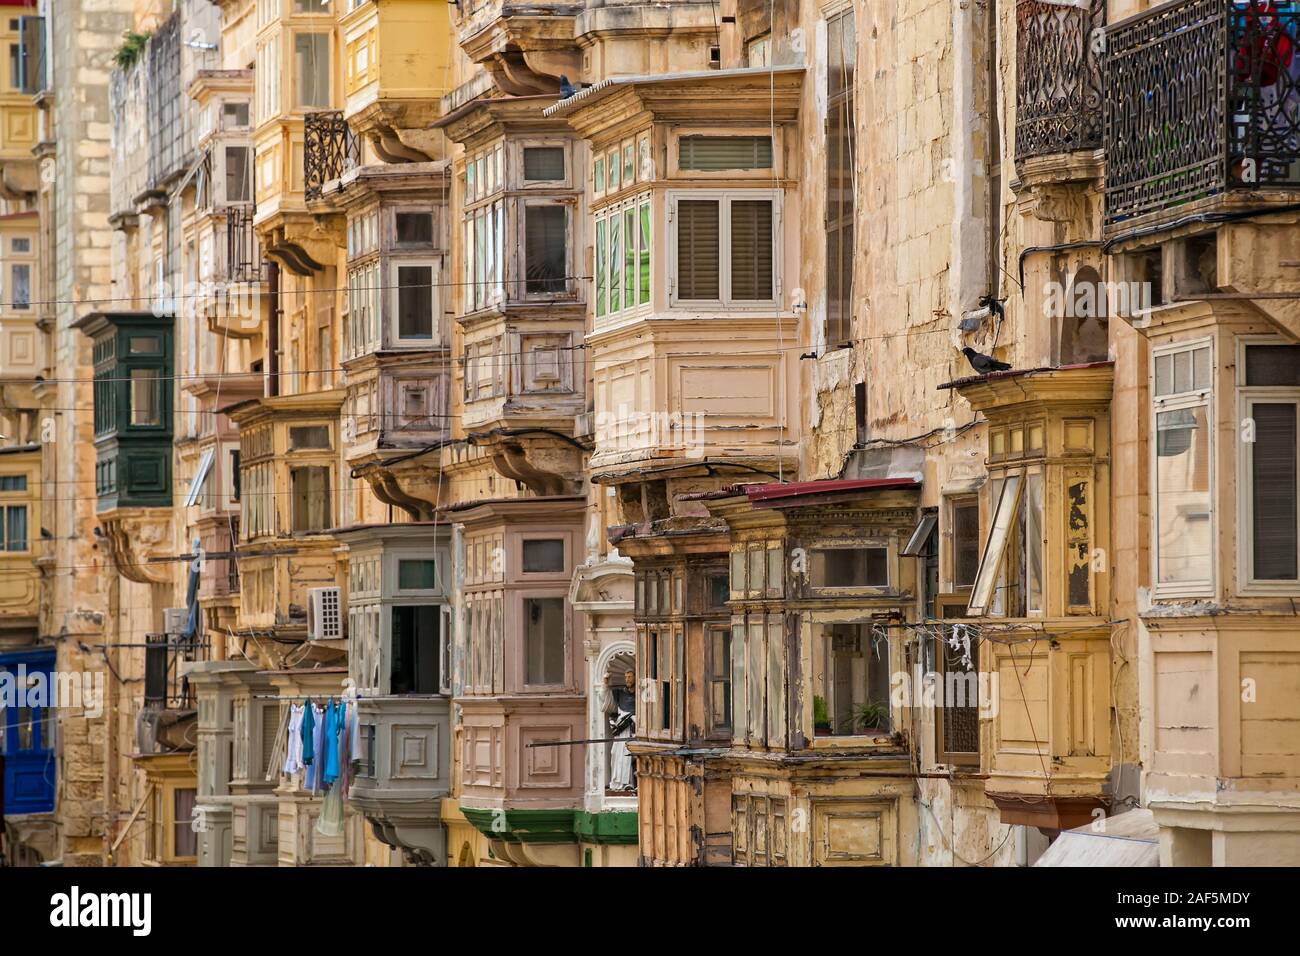 Detail shot of wooden balconies in obe of the streets of Valletta in Malta. Stock Photo